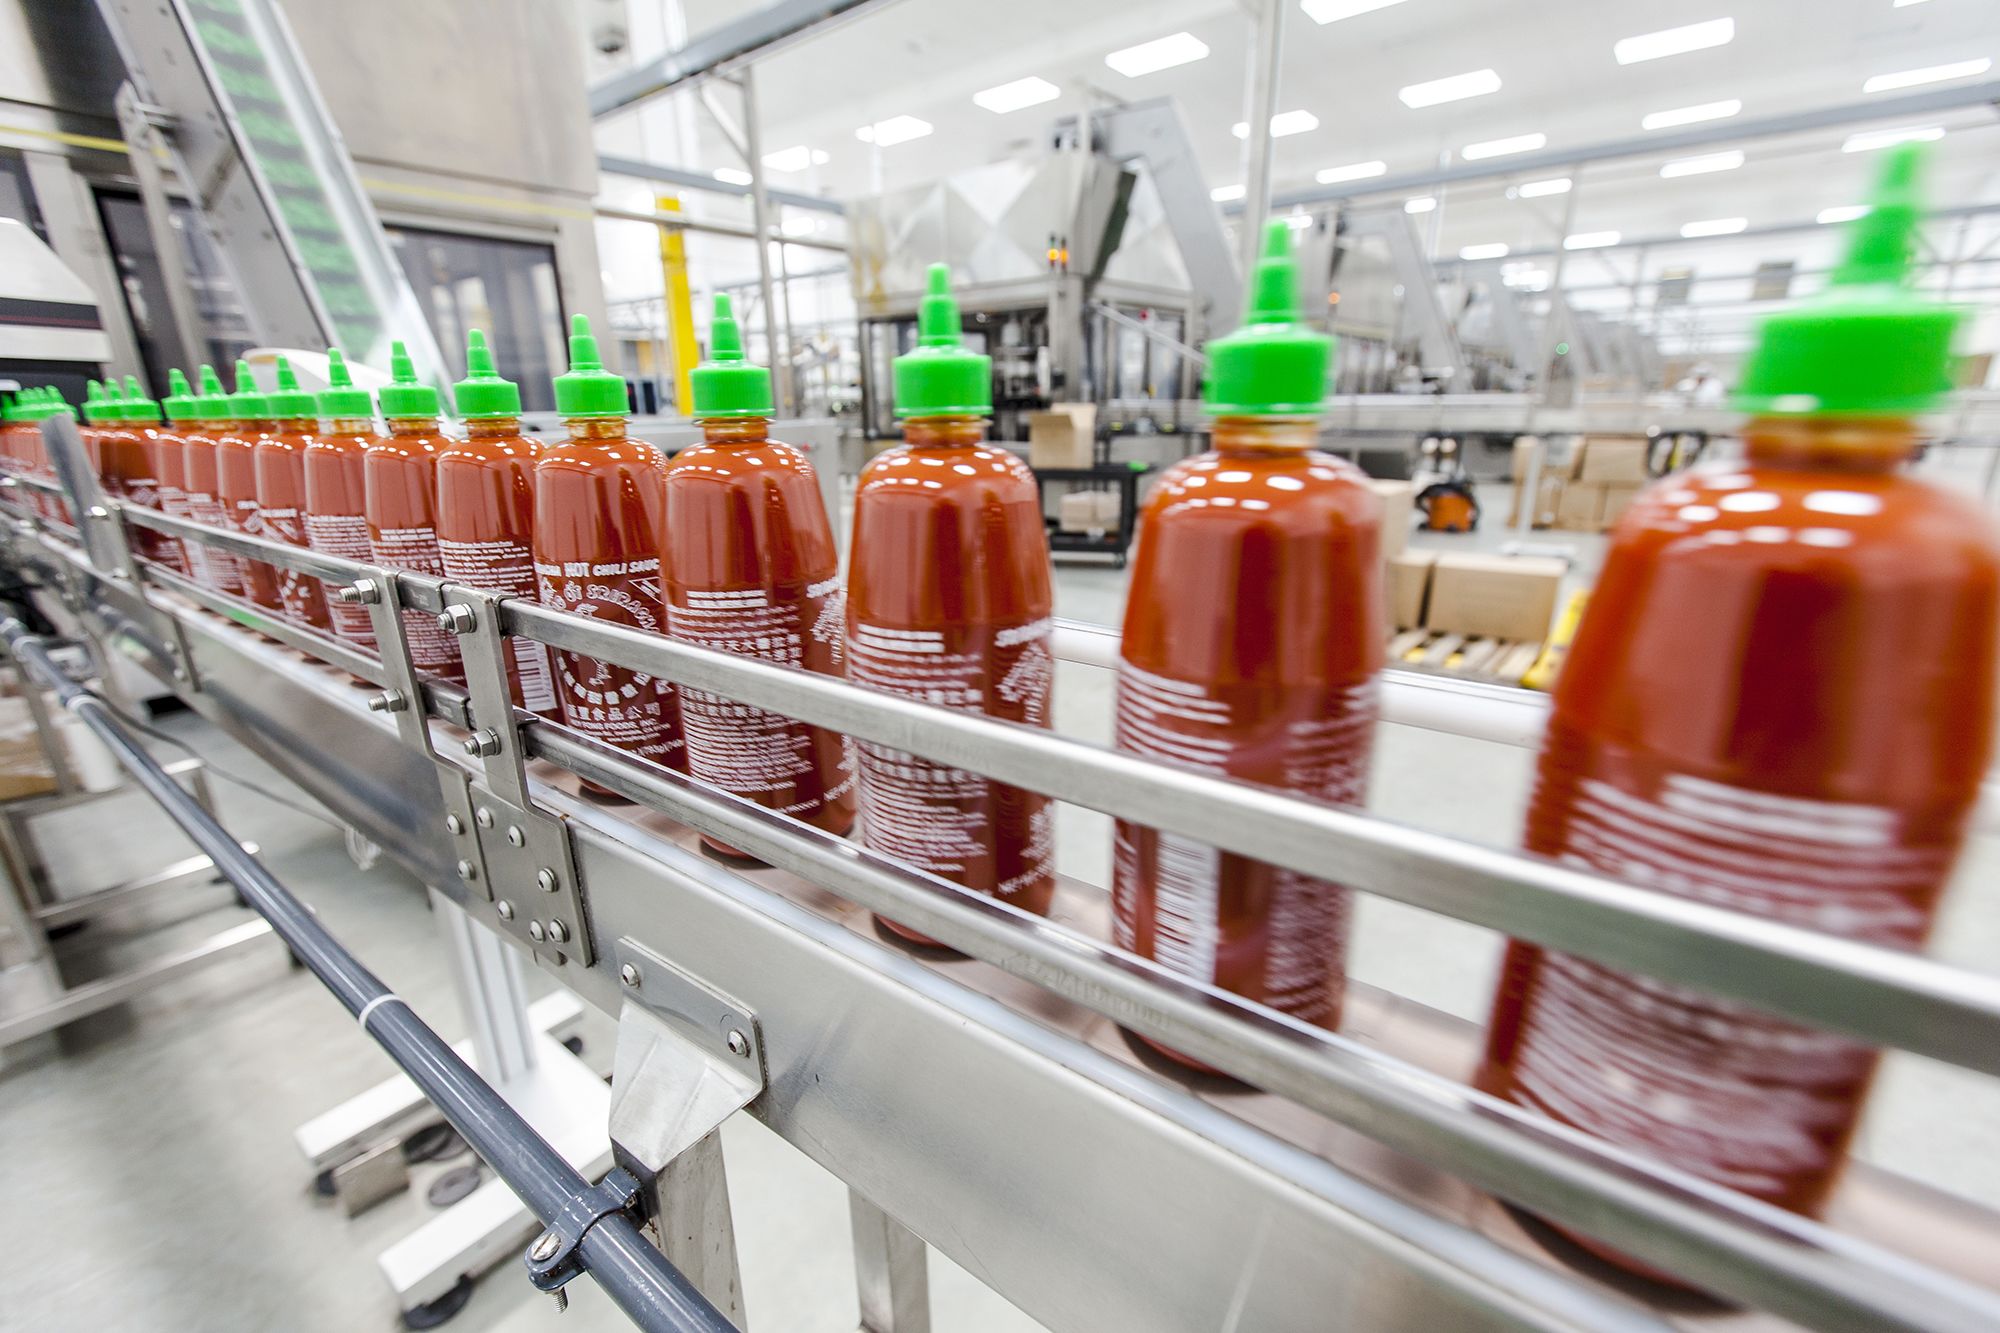 Sriracha shortage: Supply rises, prices fall. But is it over?